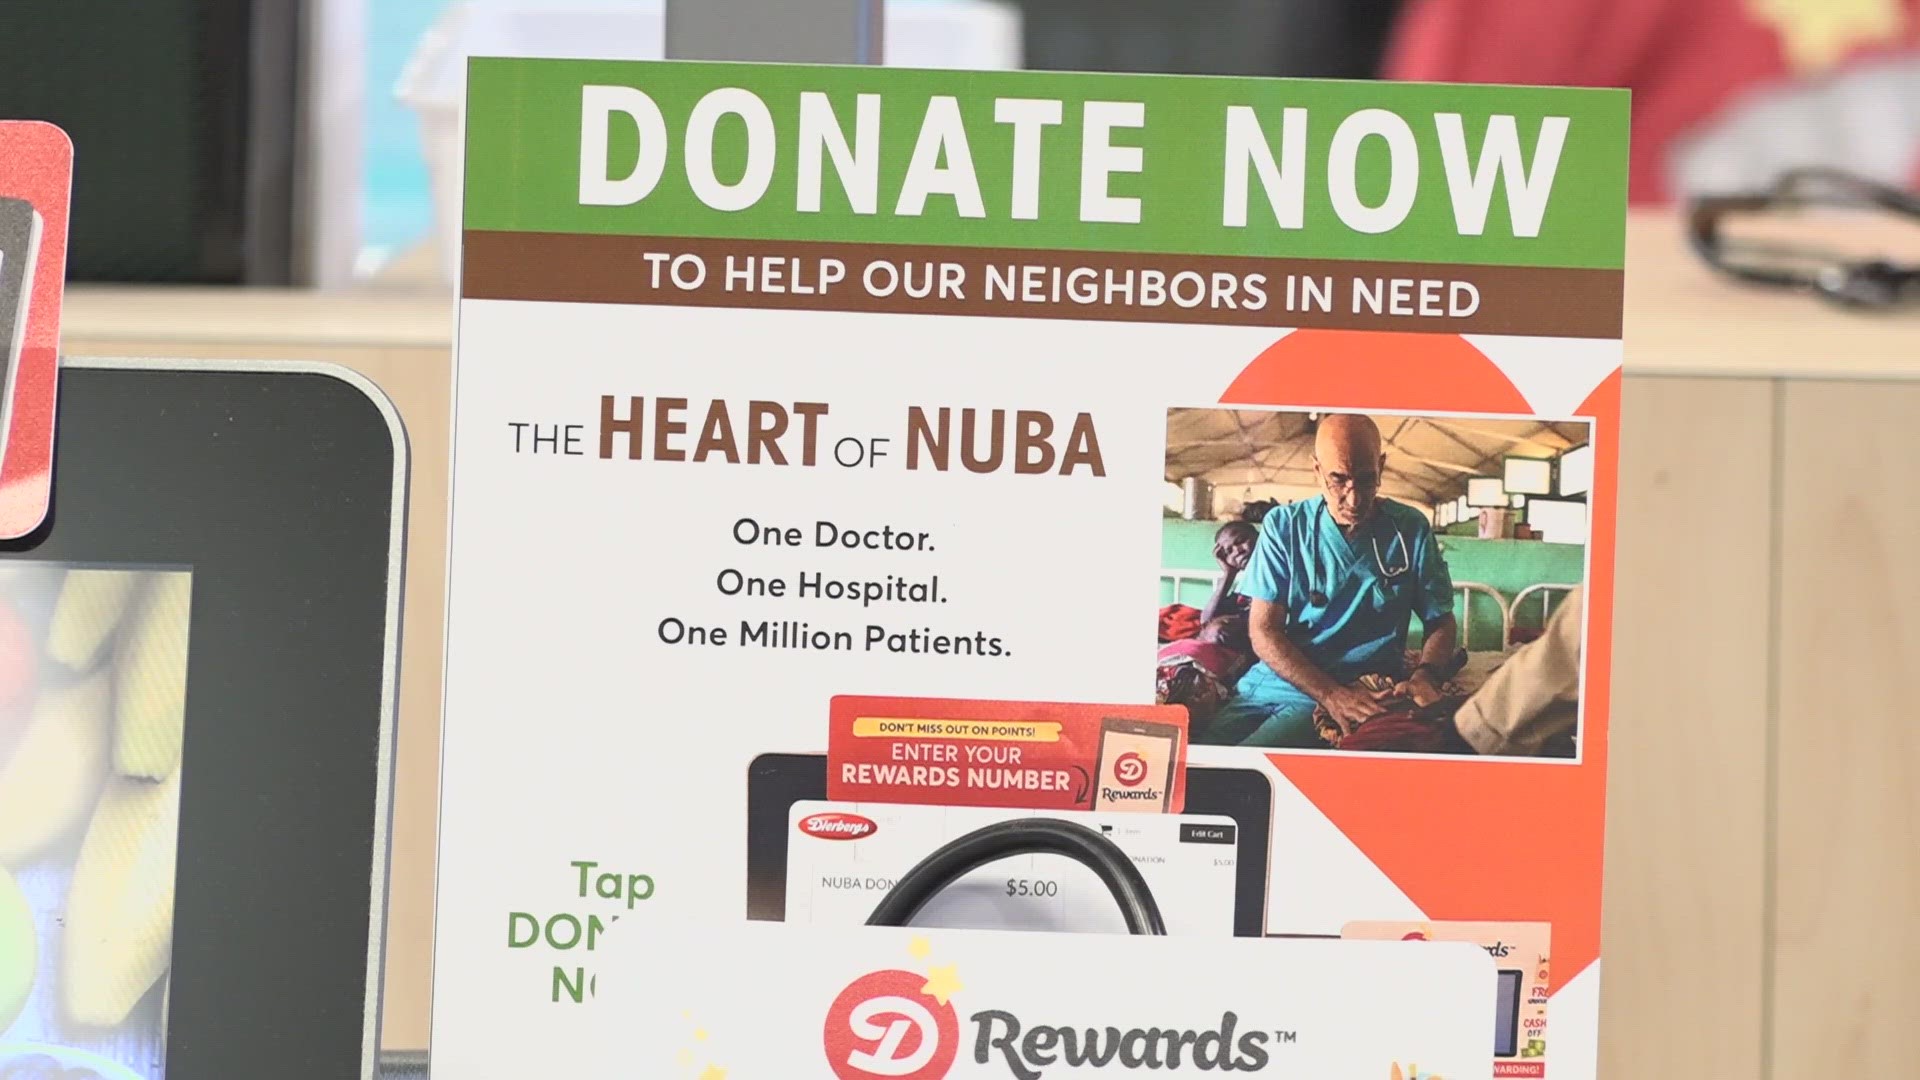 The Dierbergs “round up” campaign encourages people to round up to the nearest dollar at the cash register. Proceeds will be donated to a hospital in war-torn Sudan.